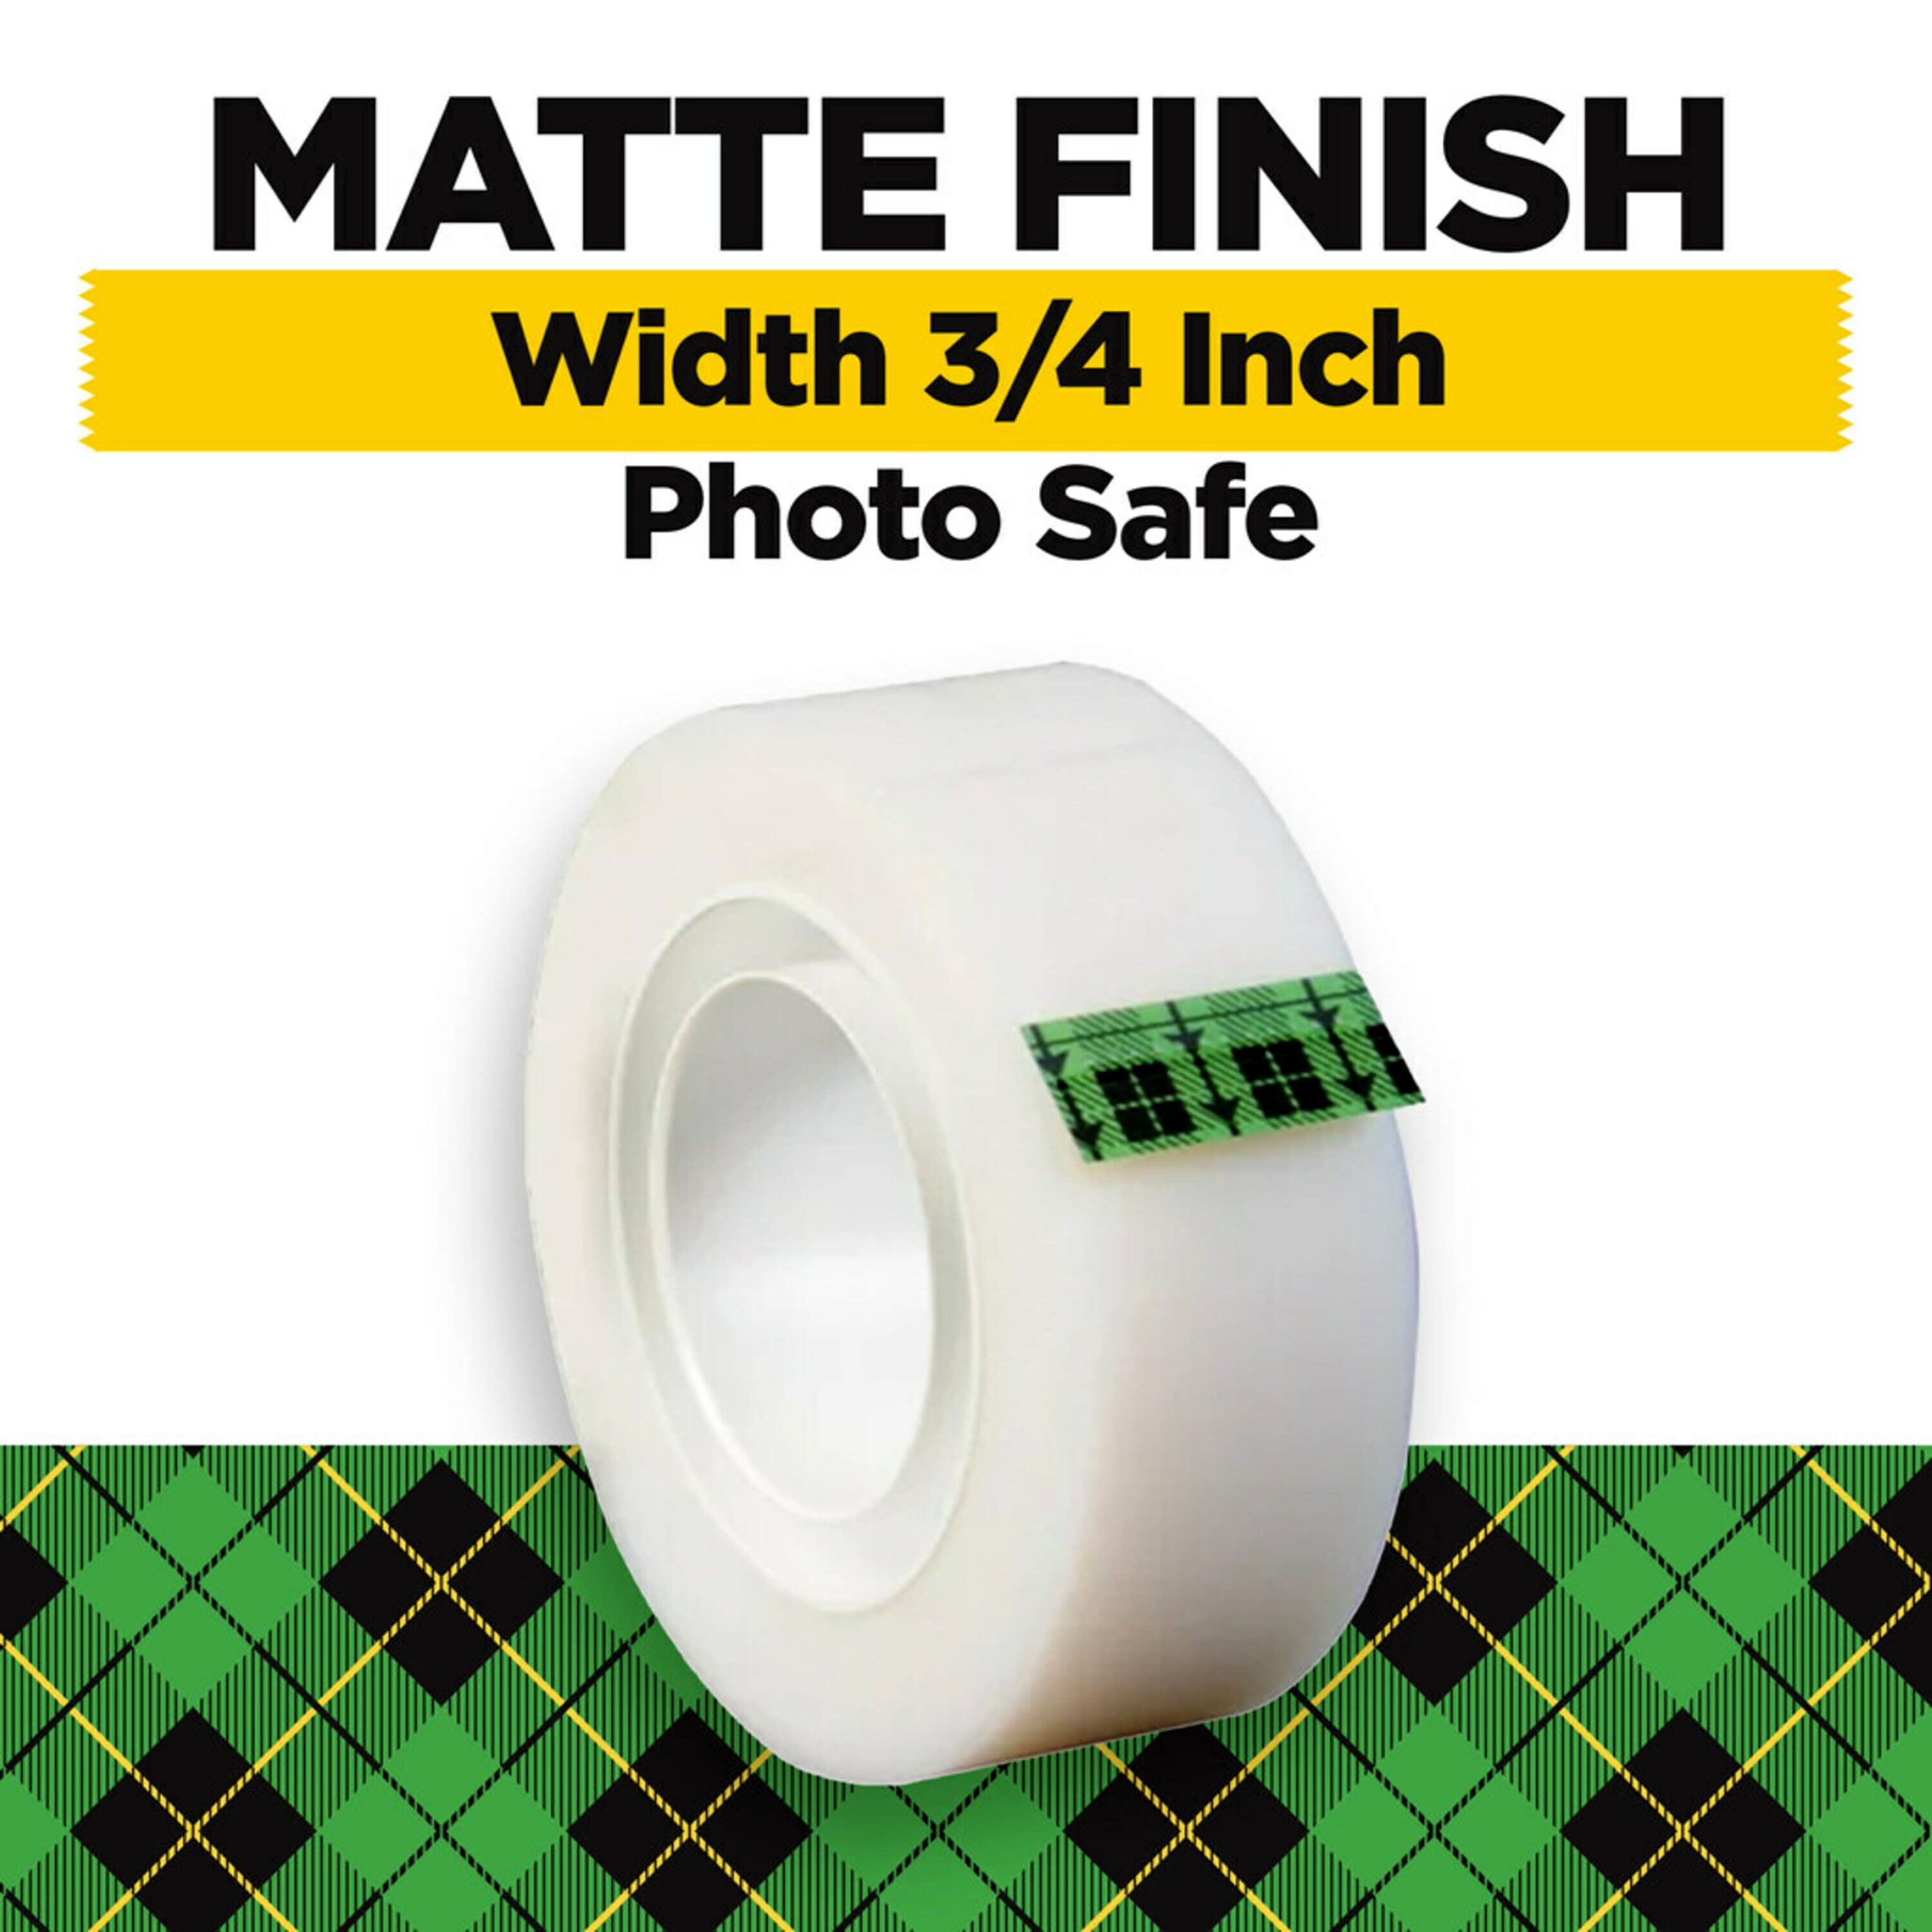 Scotch Magic Tape, 6 Rolls, Numerous Applications, Invisible, Engineered for Repairing, 3/4 x 1000 Inches, Boxed (810k6)